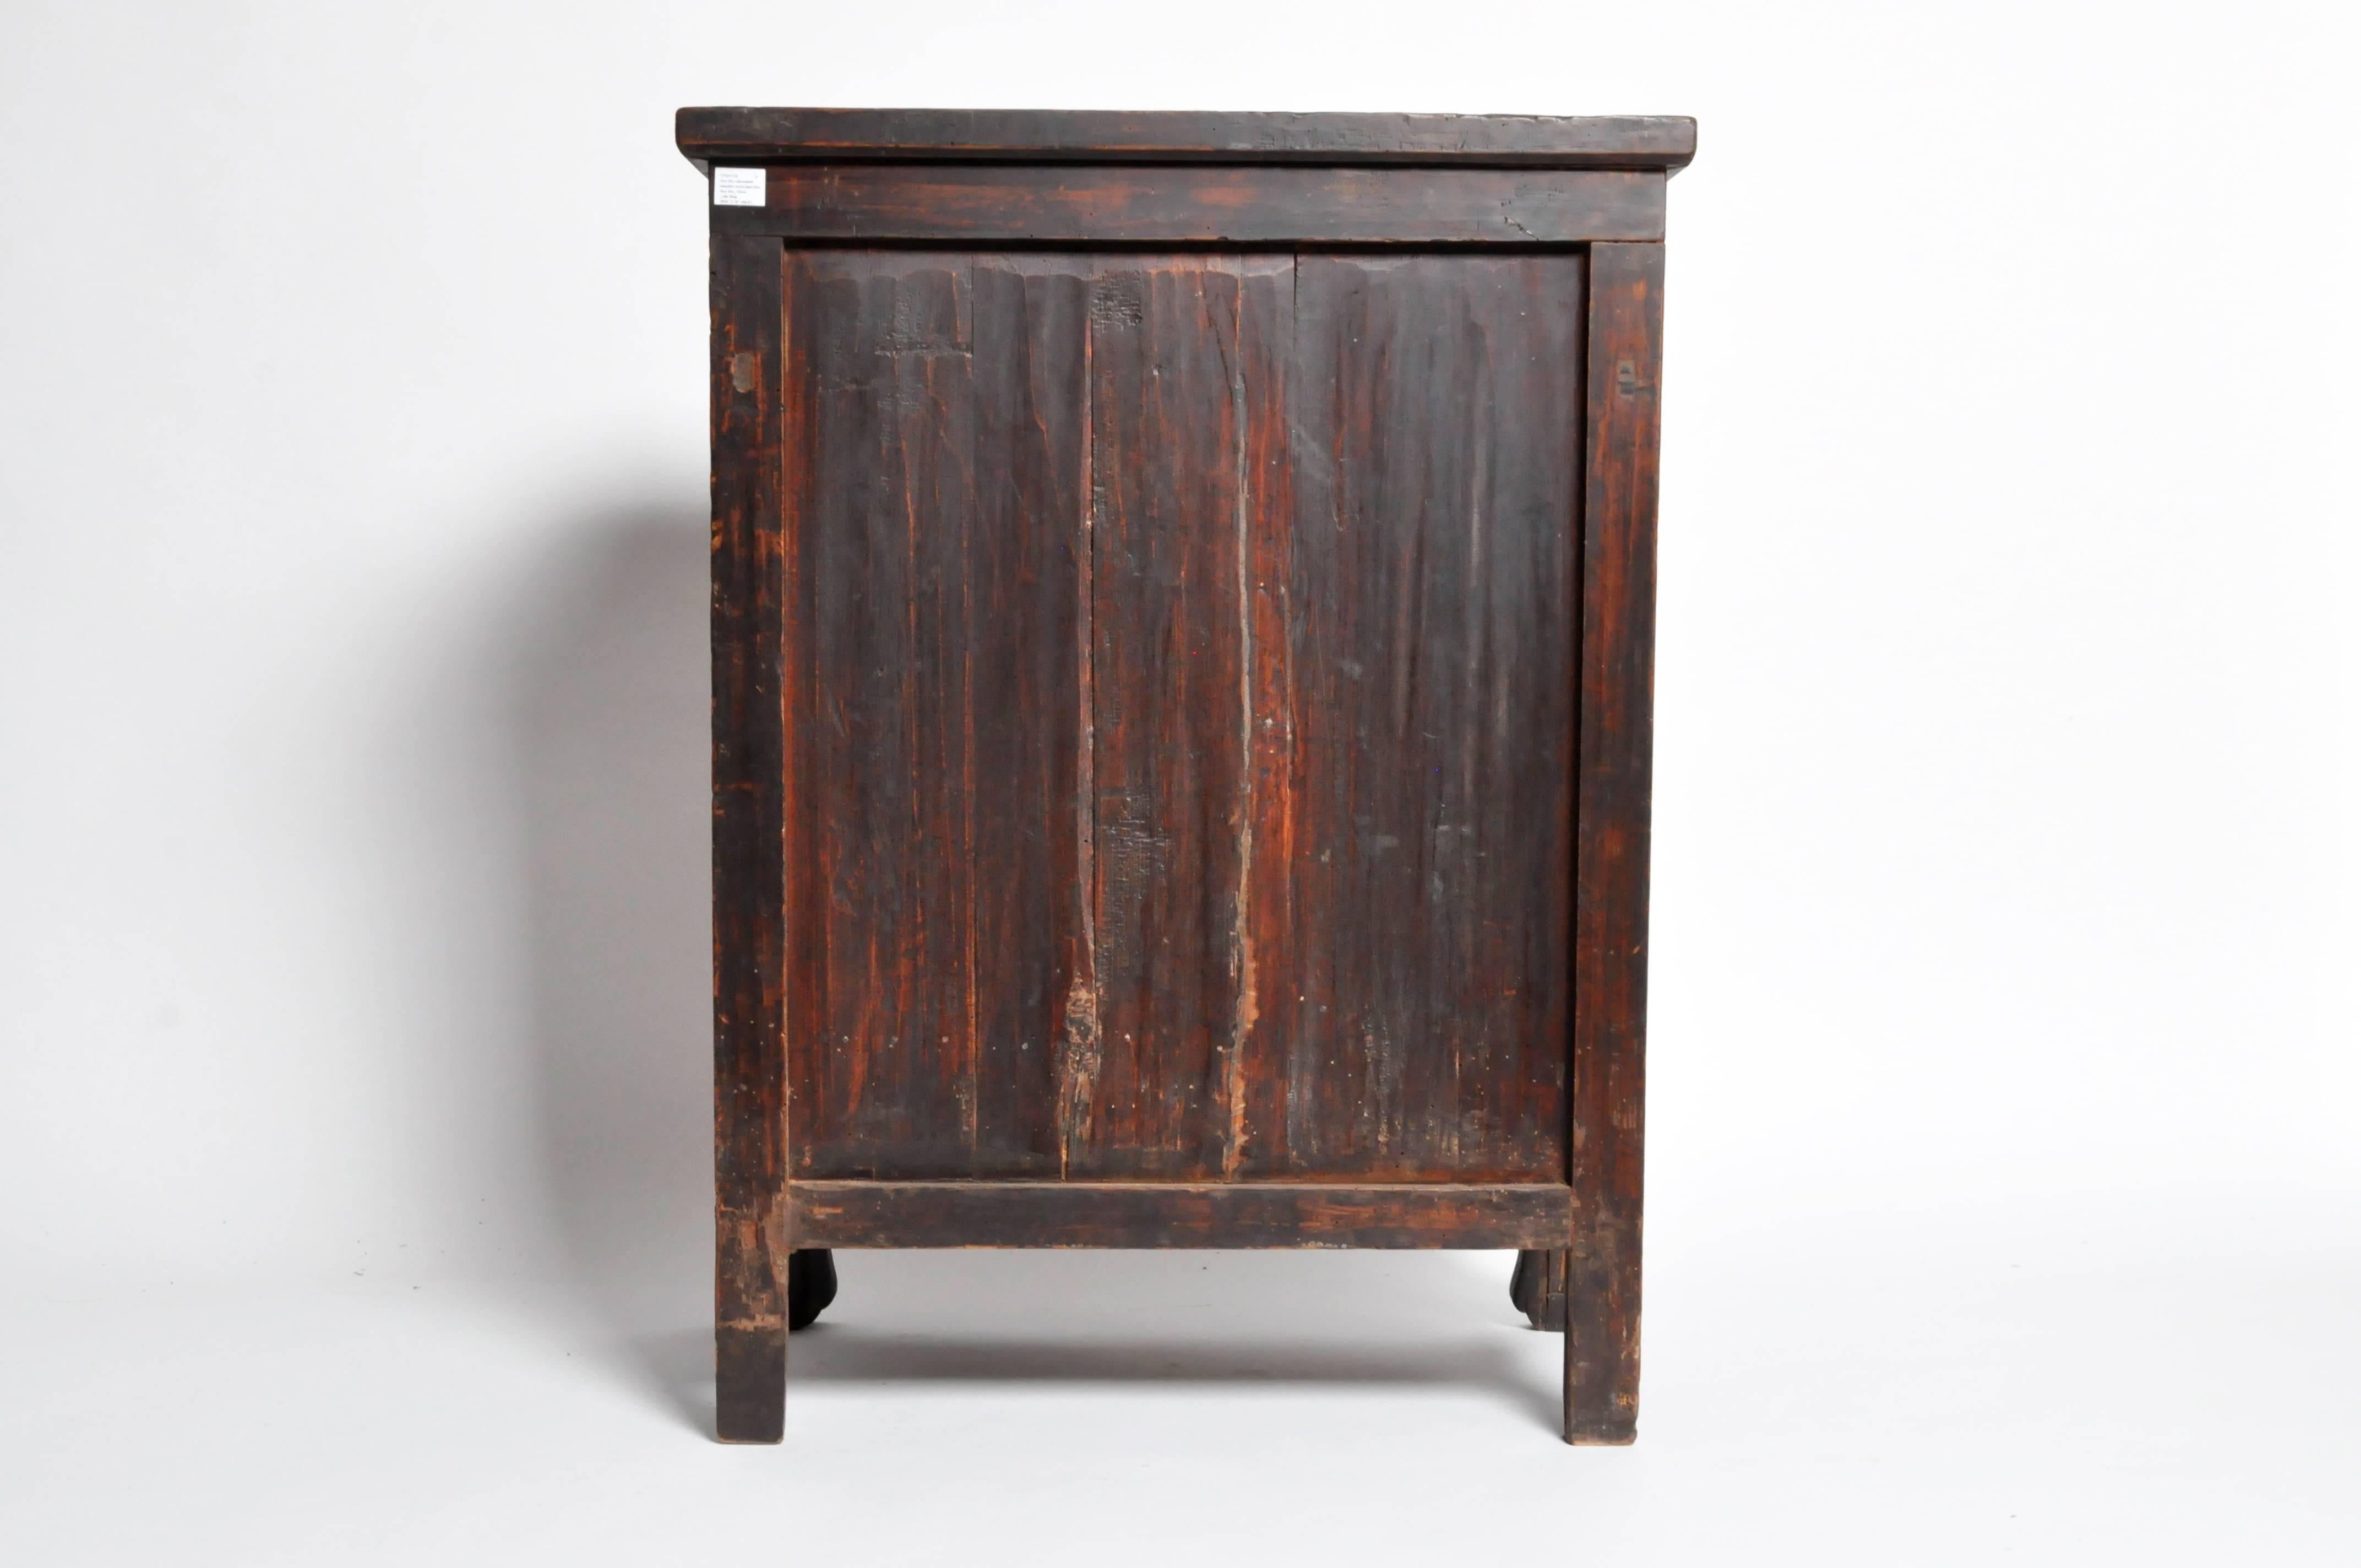 This Chinese cabinet is from the late Qing dynasty and features heavily figured wood grain on doors and drawers. Lacquer is original.